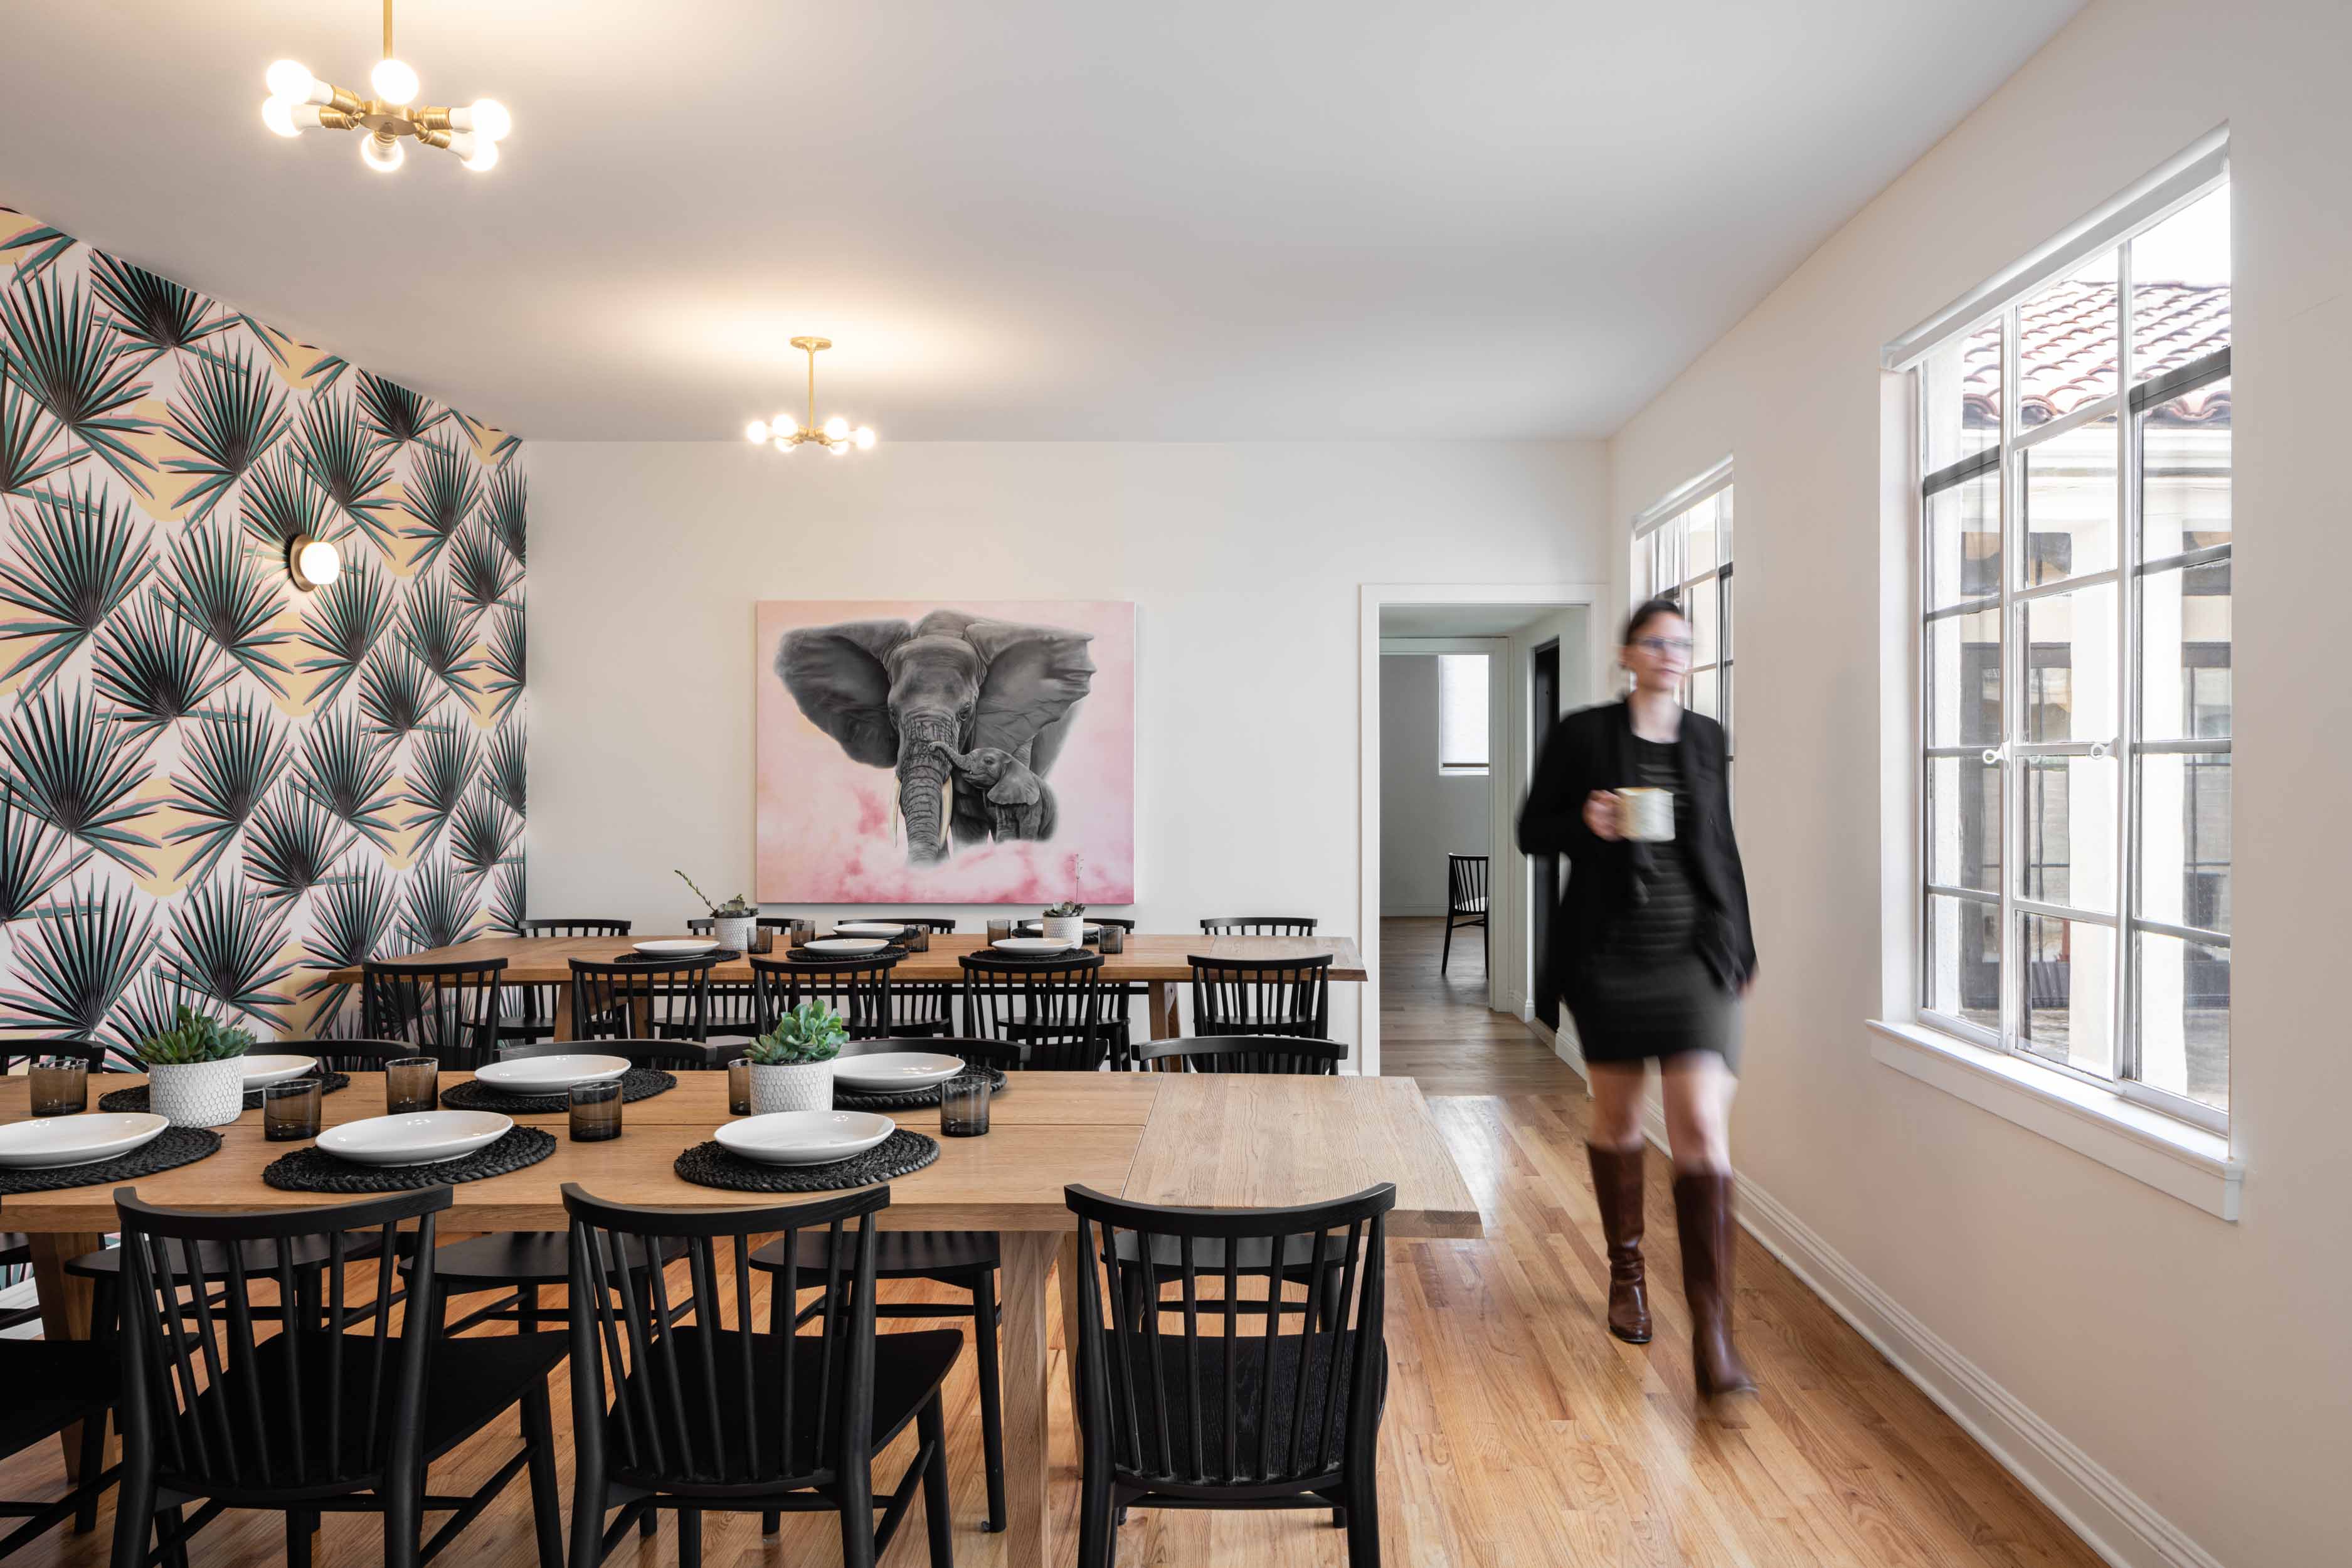 Woman walking into dining room with funky wallpaper and elephant art